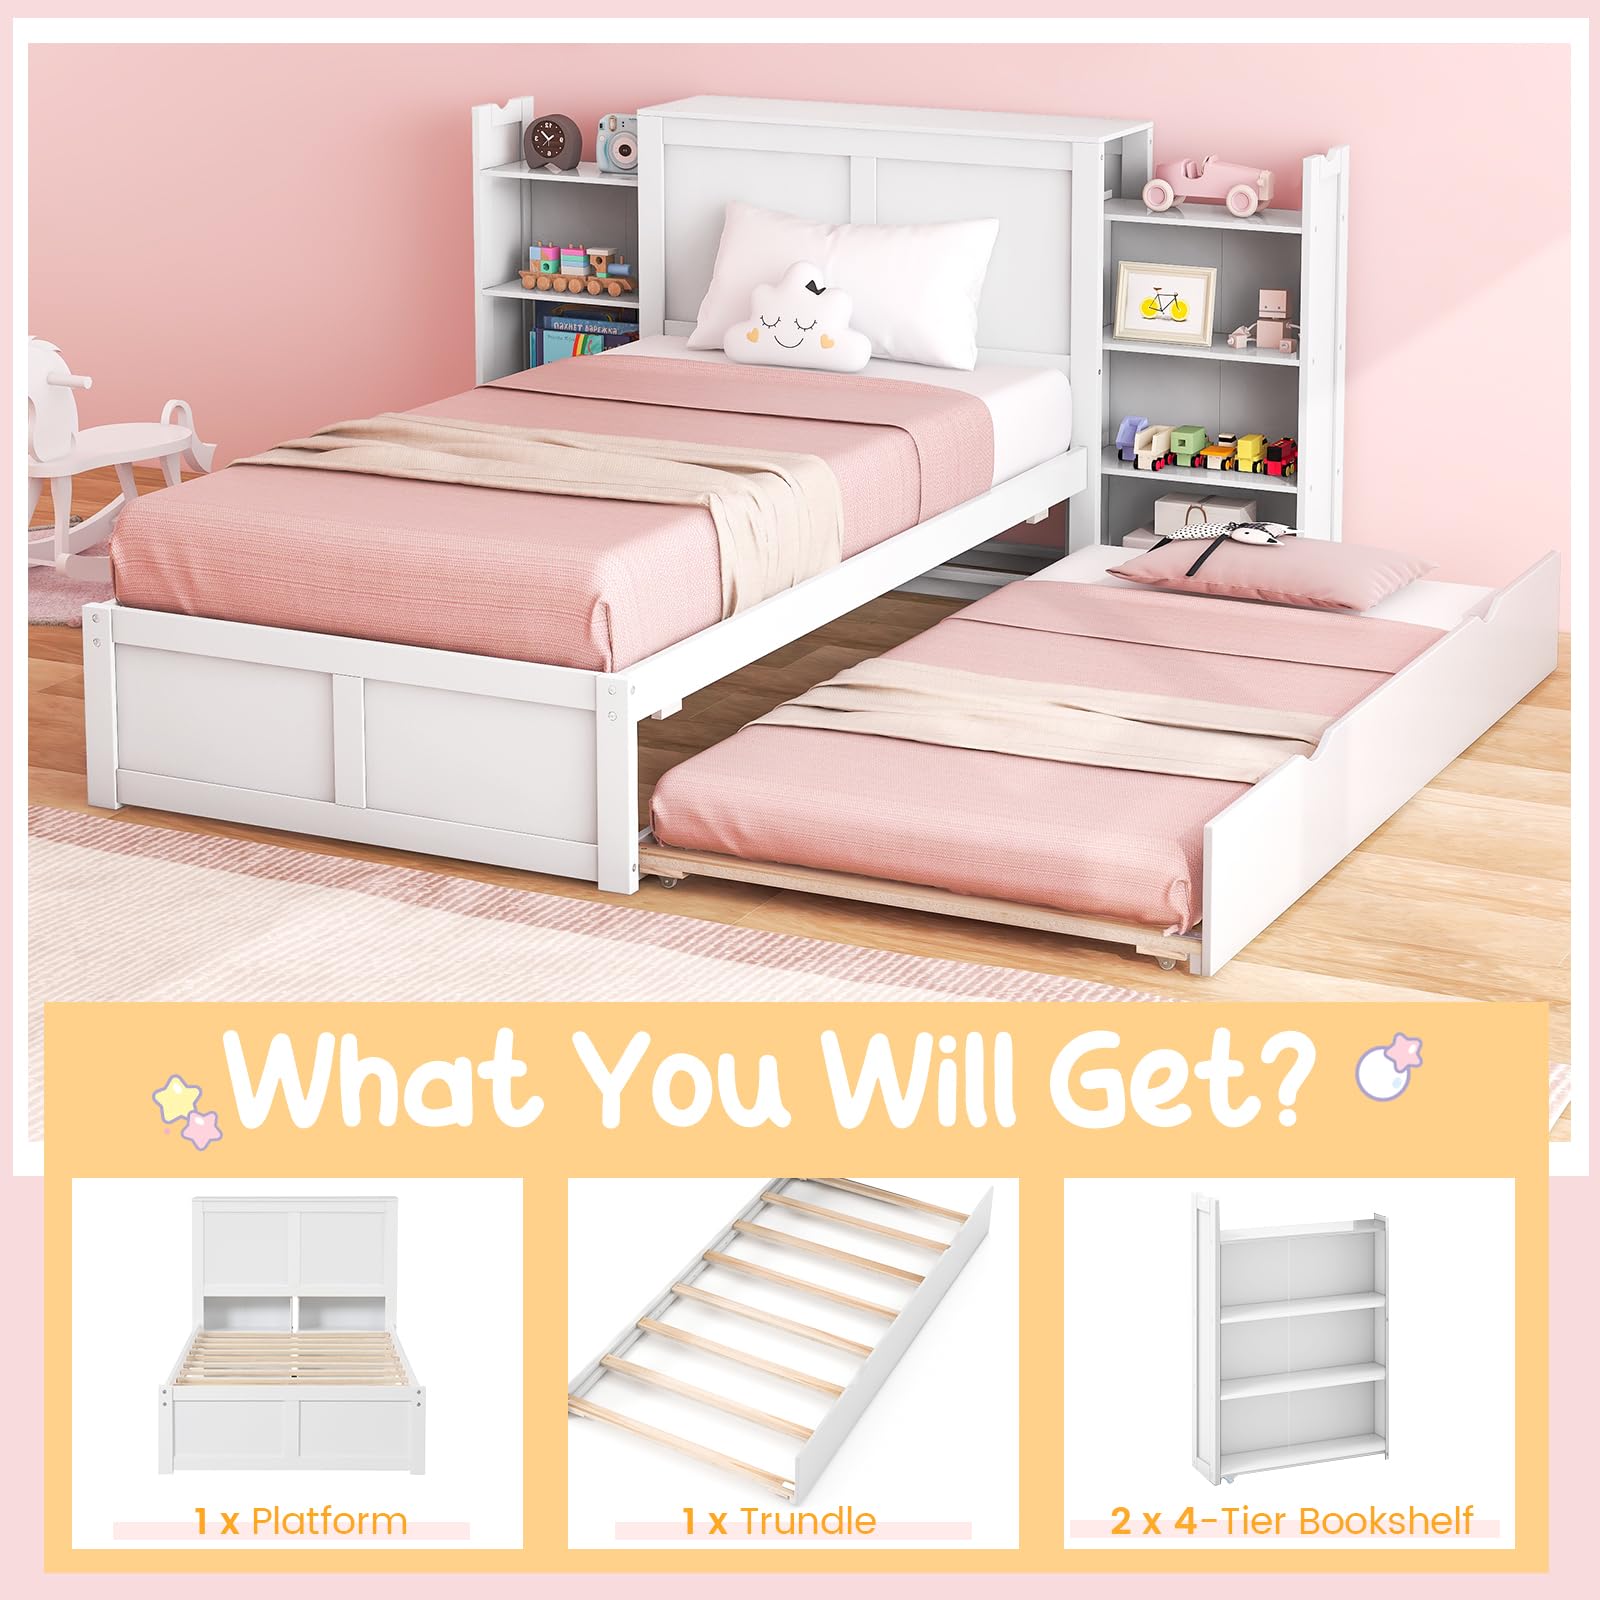 Giantex Full Bed Frame with Twin Trundle, Wooden Bed Wooden Bed Frame with 2 Rolling Bookcases & High Headboard